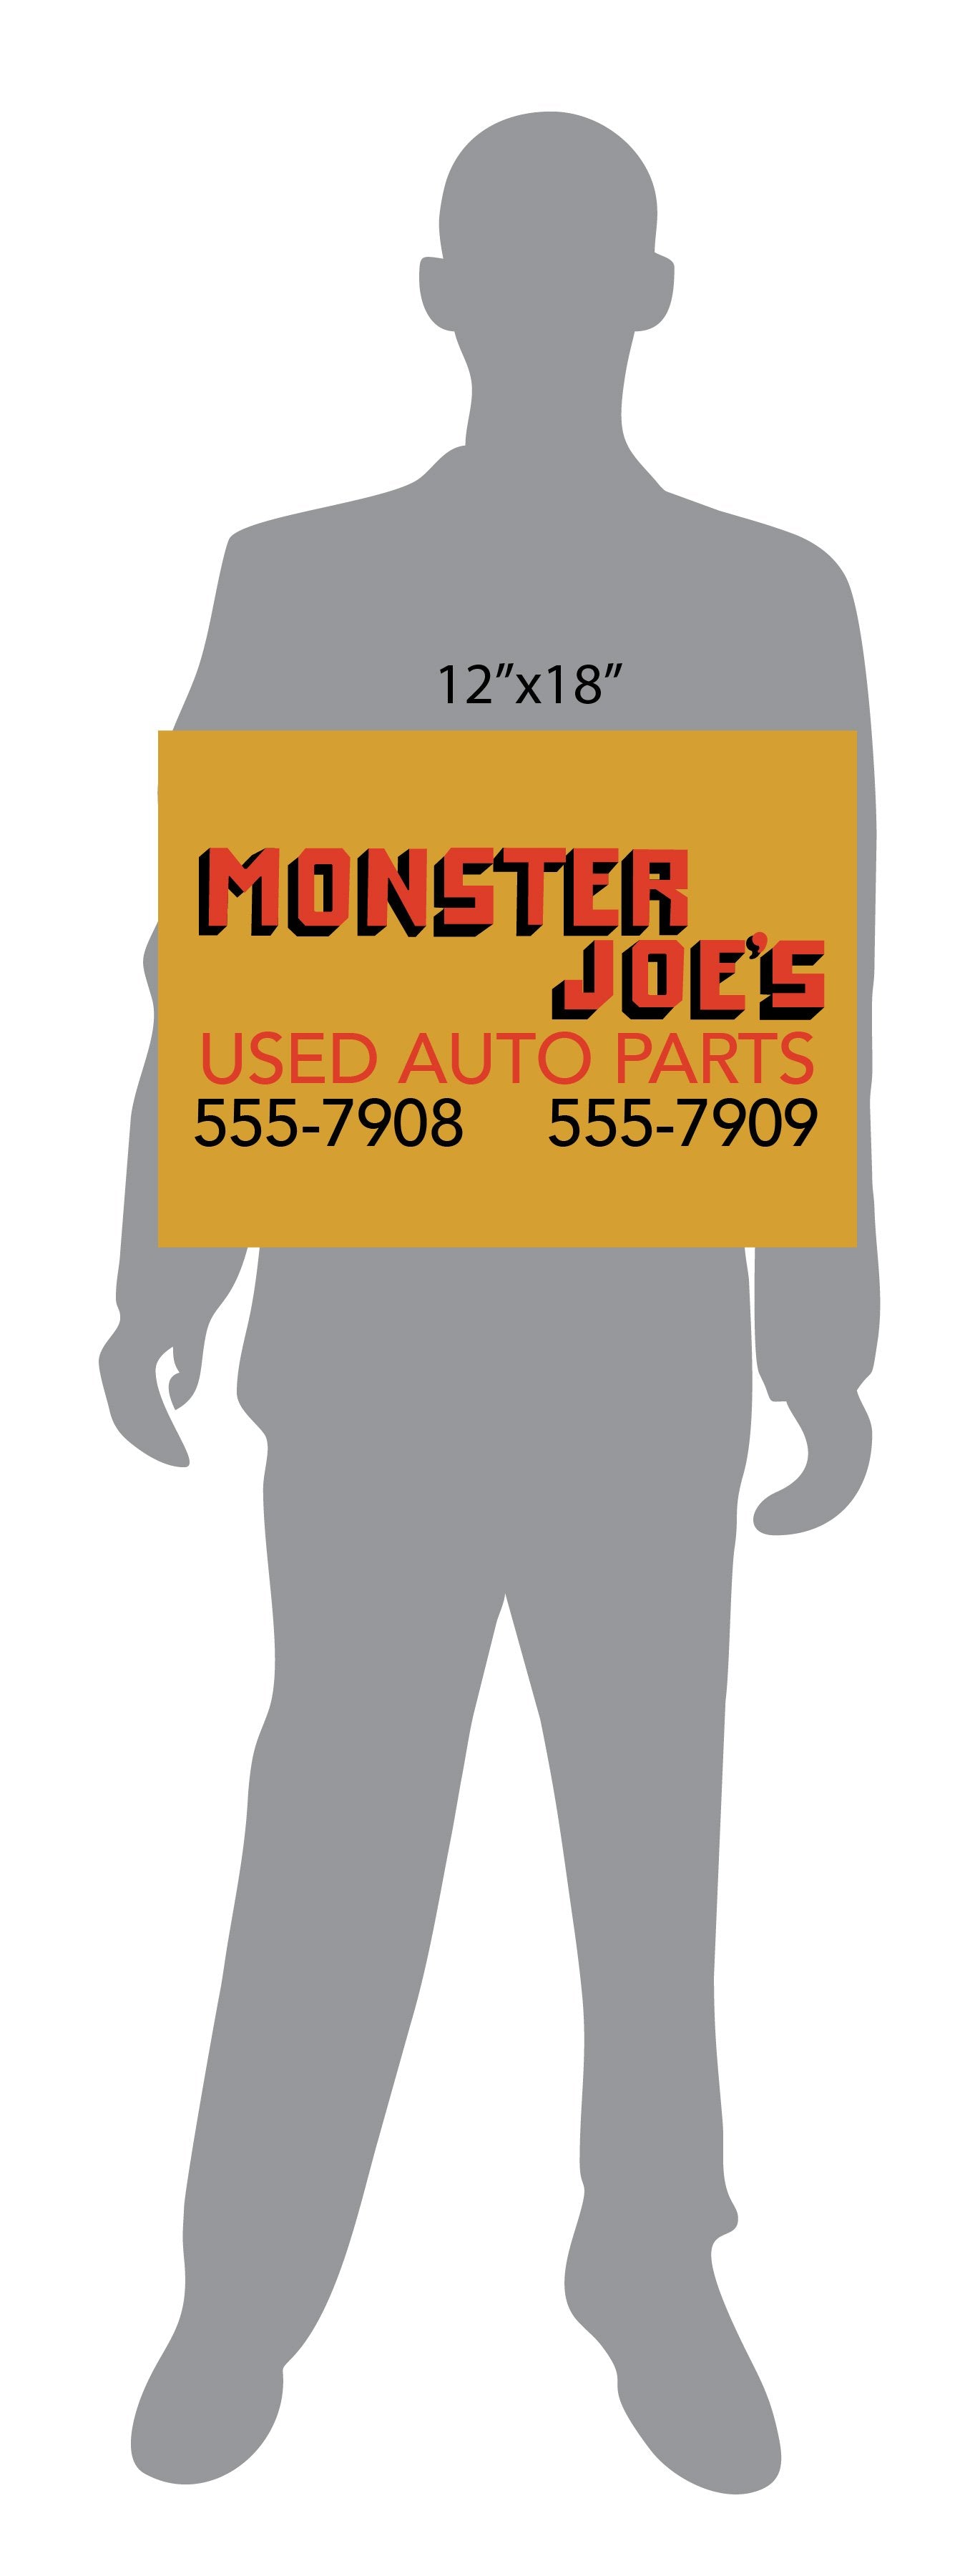 Monster Joe's Used Auto Parts Pulp Fiction Sign